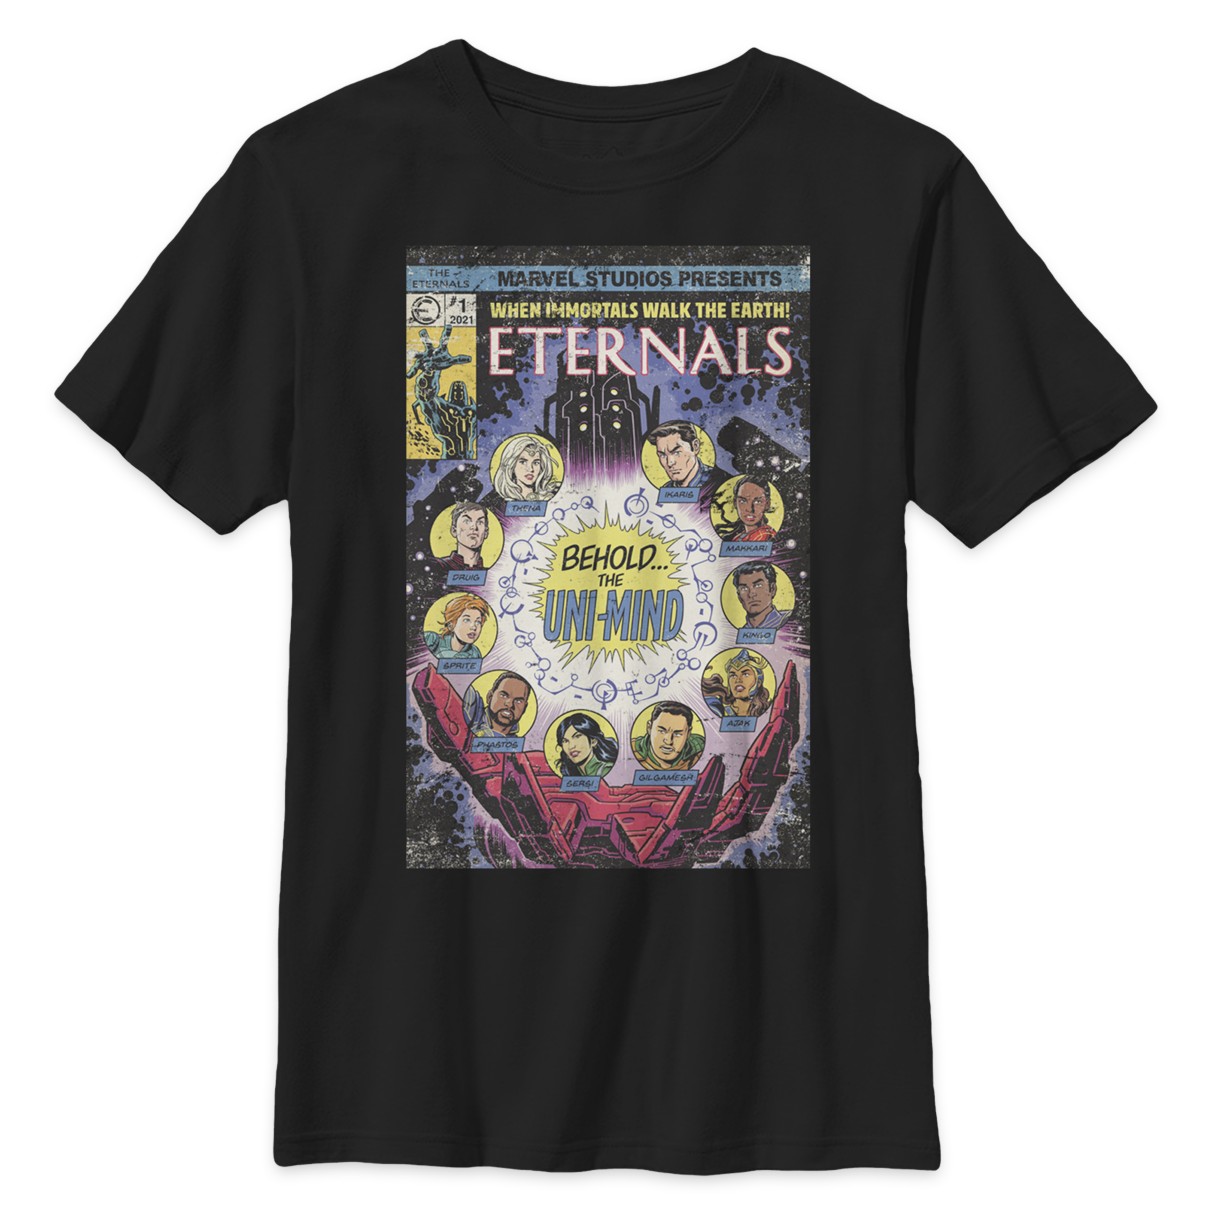 Eternals ''Comic Book Cover'' T-Shirt for Kids